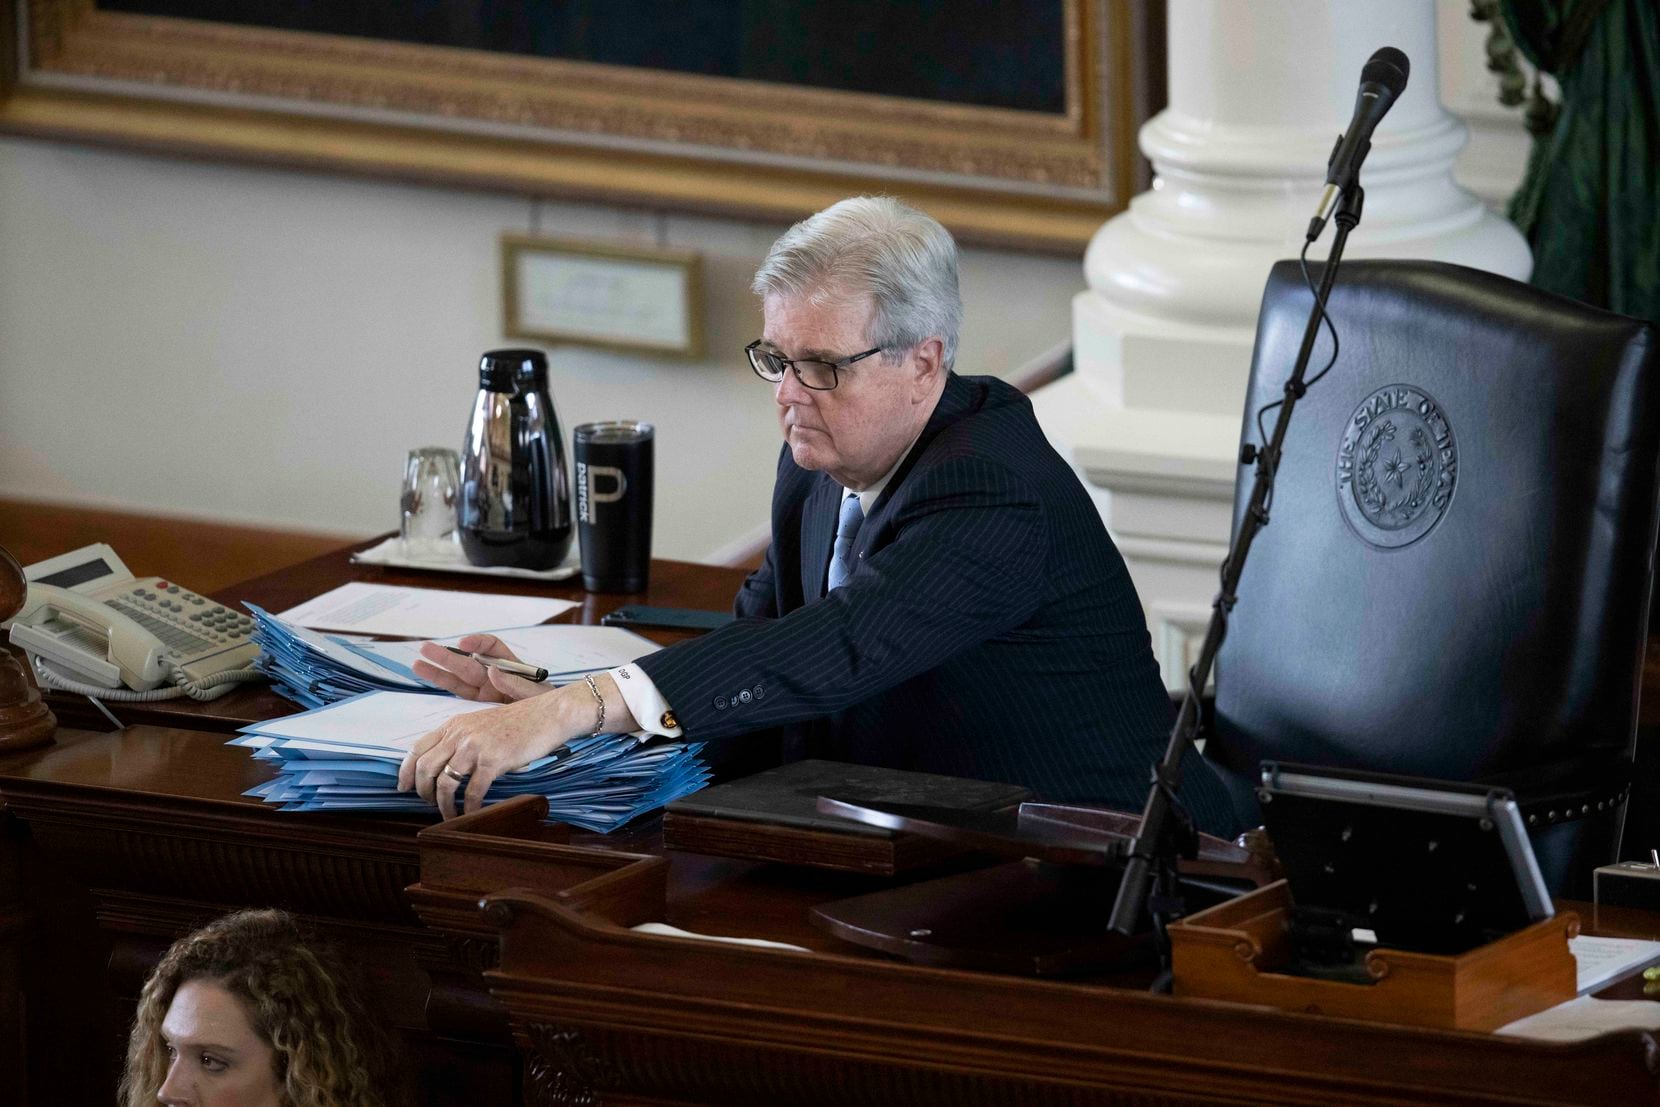 Two forces are driving the rightward tilt in Austin – Lt. Gov. Dan Patrick, who “has exercised pretty much absolute control over the Texas Senate,” and GOP “base” voters loyal to former President Donald Trump, said Rice University political scientist Mark Jones. In May file photo, Patrick presides over the Senate. It has been more enthusiastic about Gov. Greg Abbott's special-session agenda than the House. 